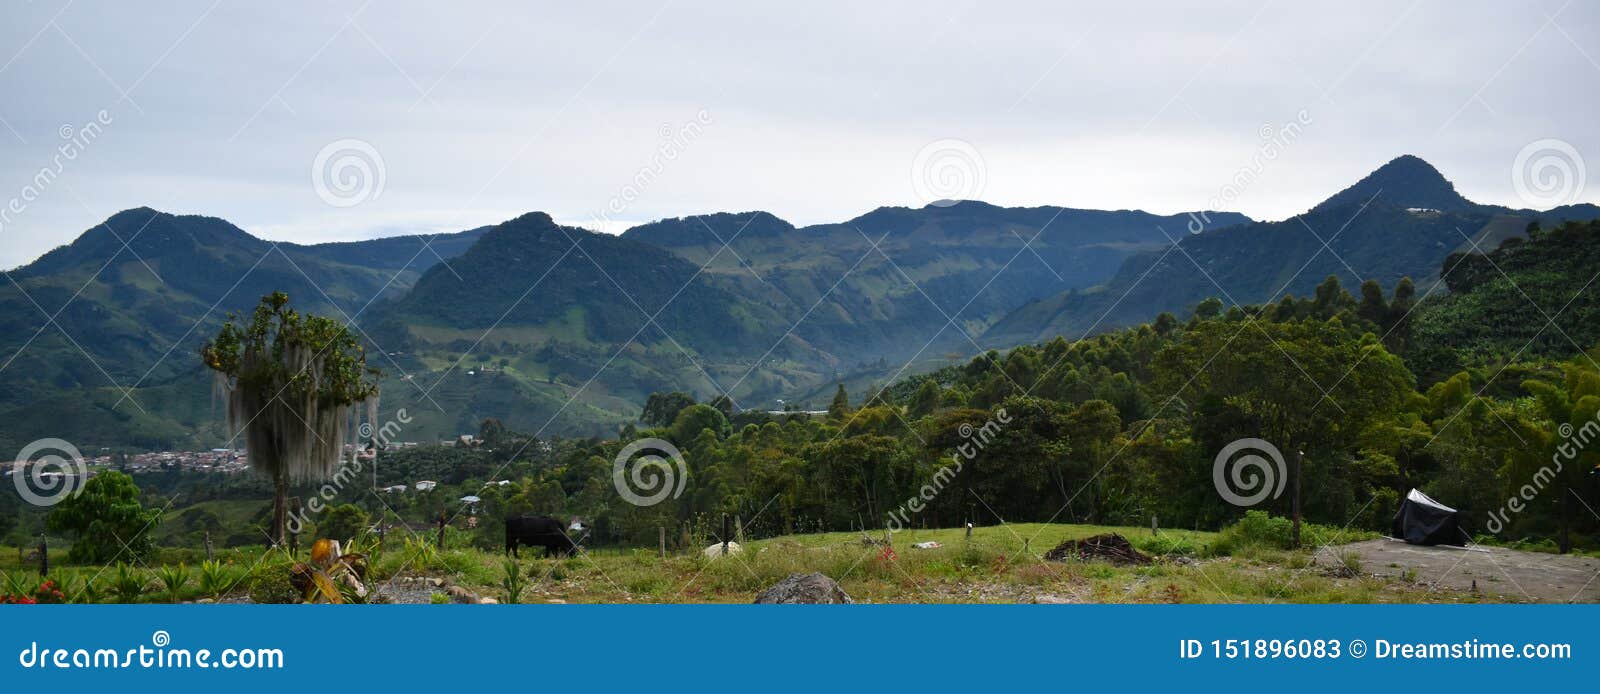 Colombia Countryside Wide With Farm Stock Image Image Of